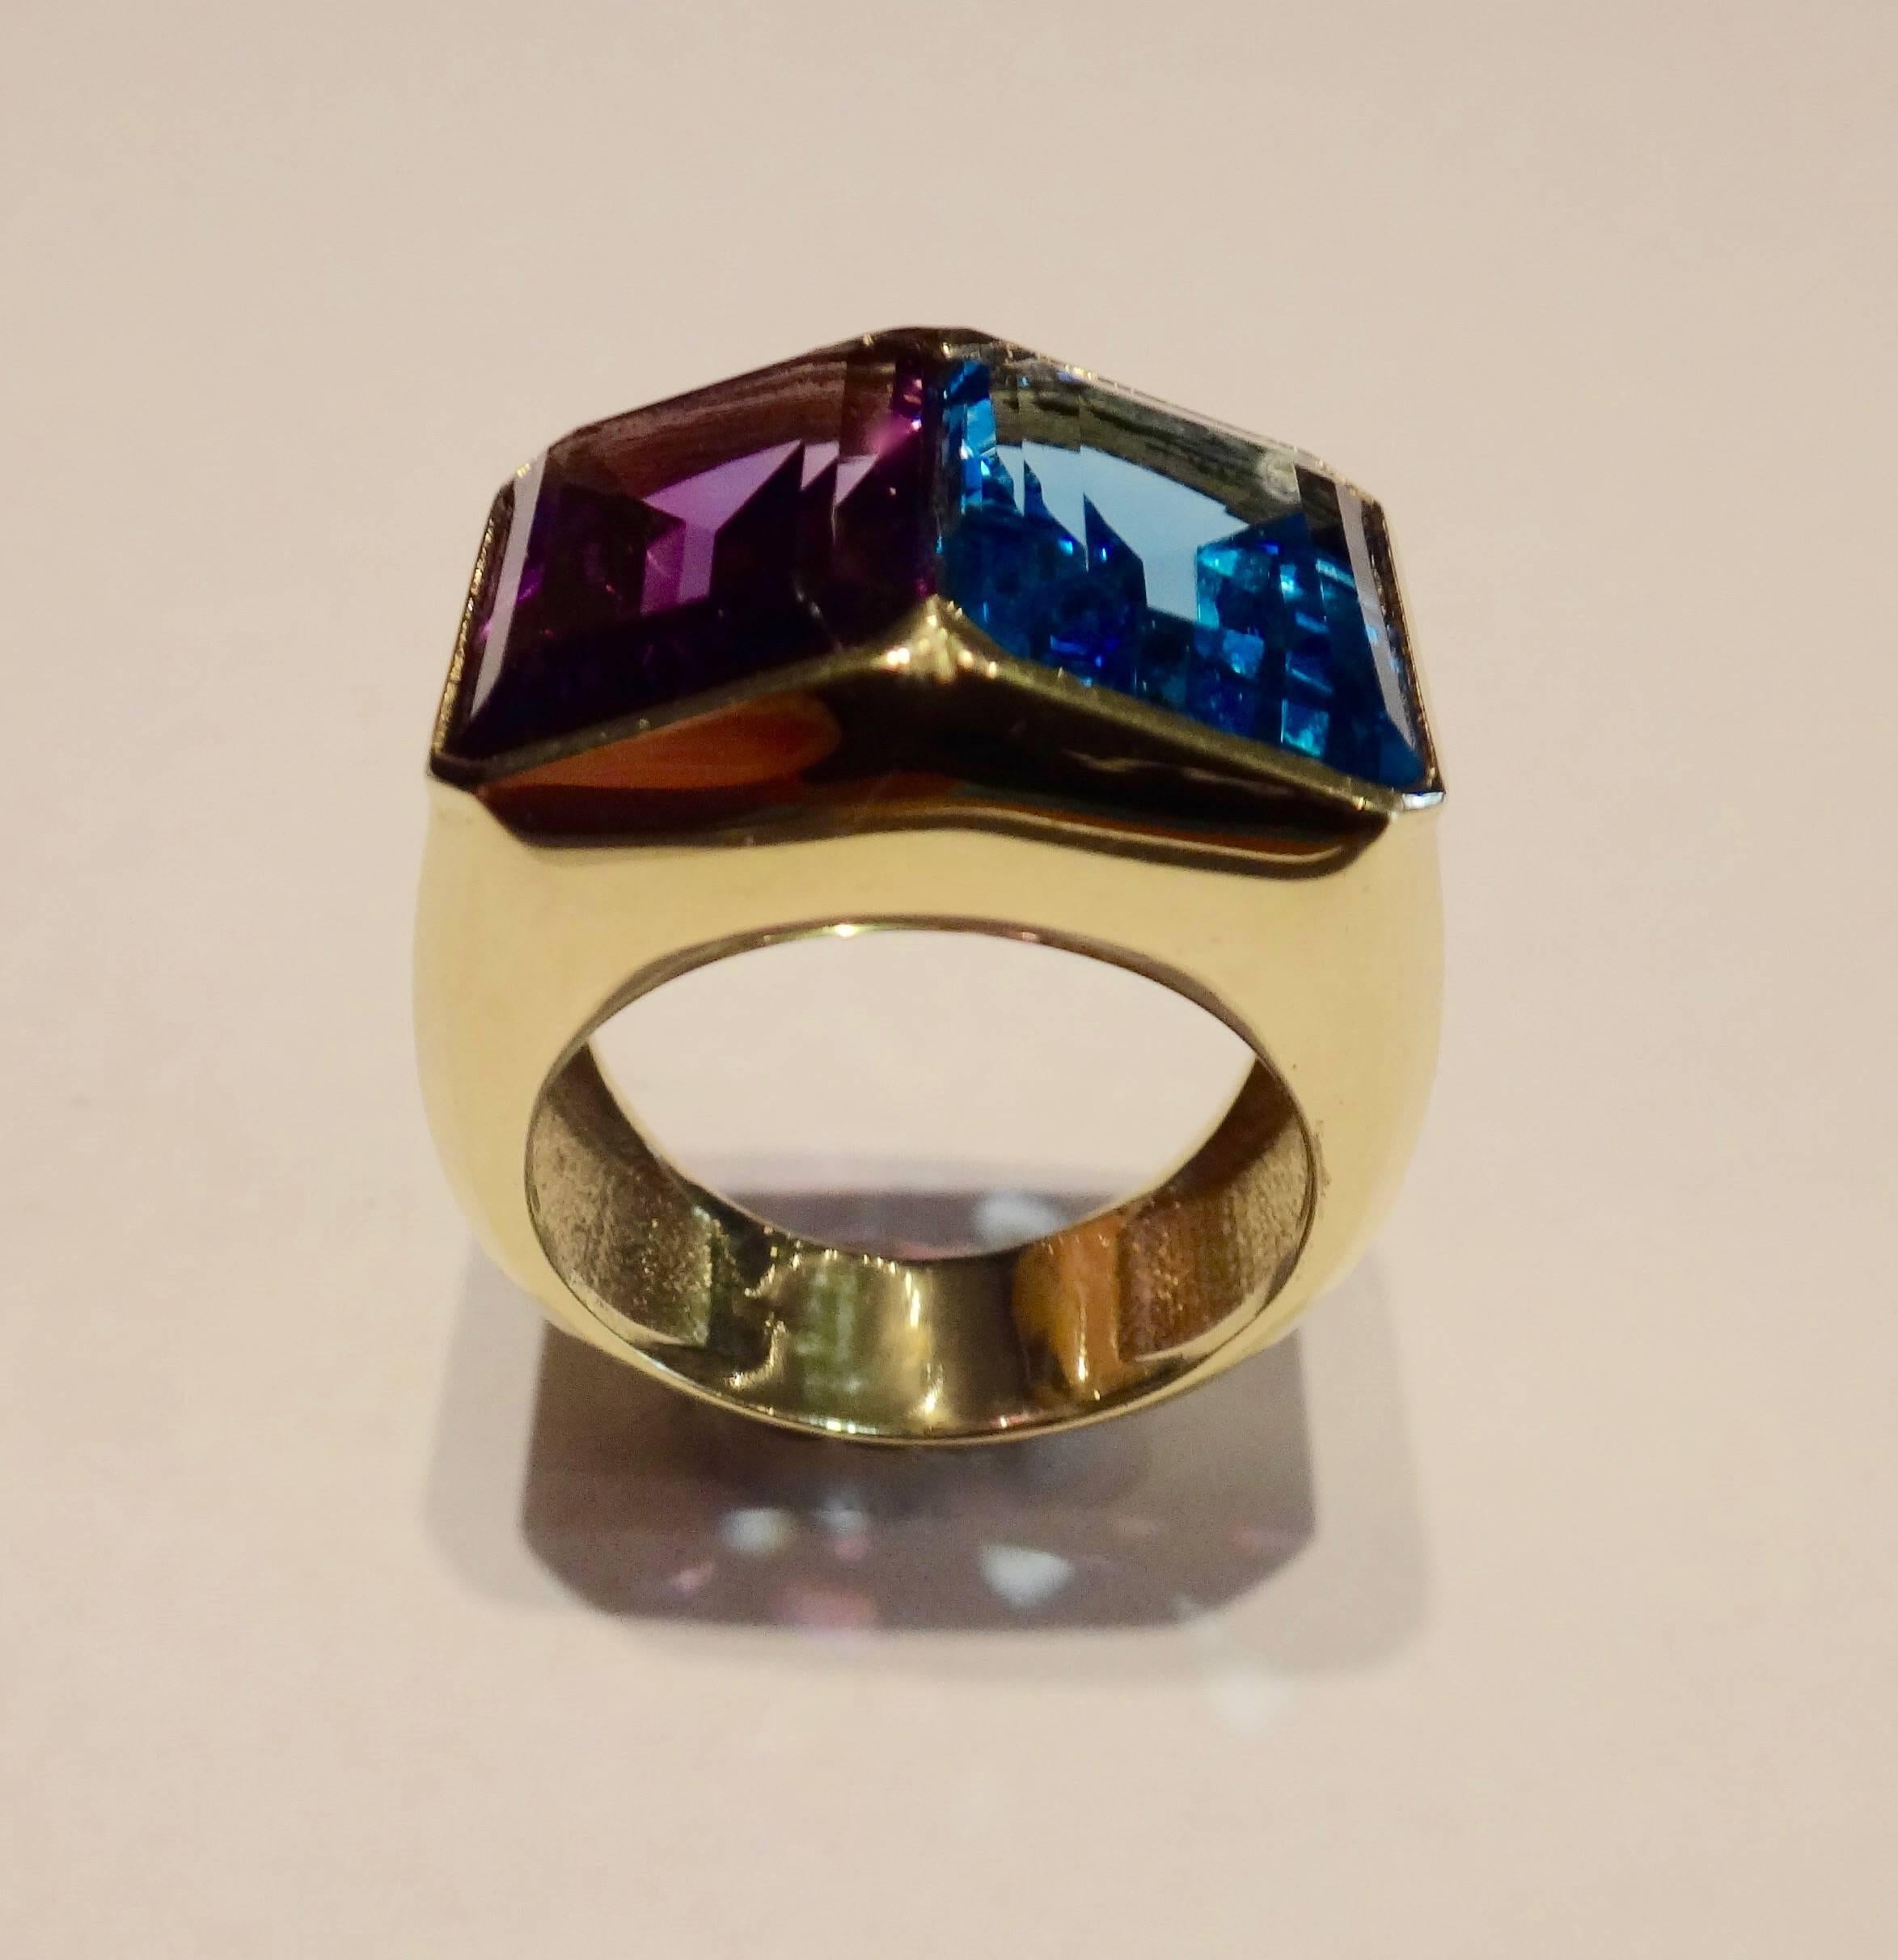 Perfectly matched and highly complimentary in color are these emerald cut London blue topaz and Deep purple amethyst set in a carefully crafted 18k yellow gold cocktail ring.  Ring size 7 and may to some degree be sized.  